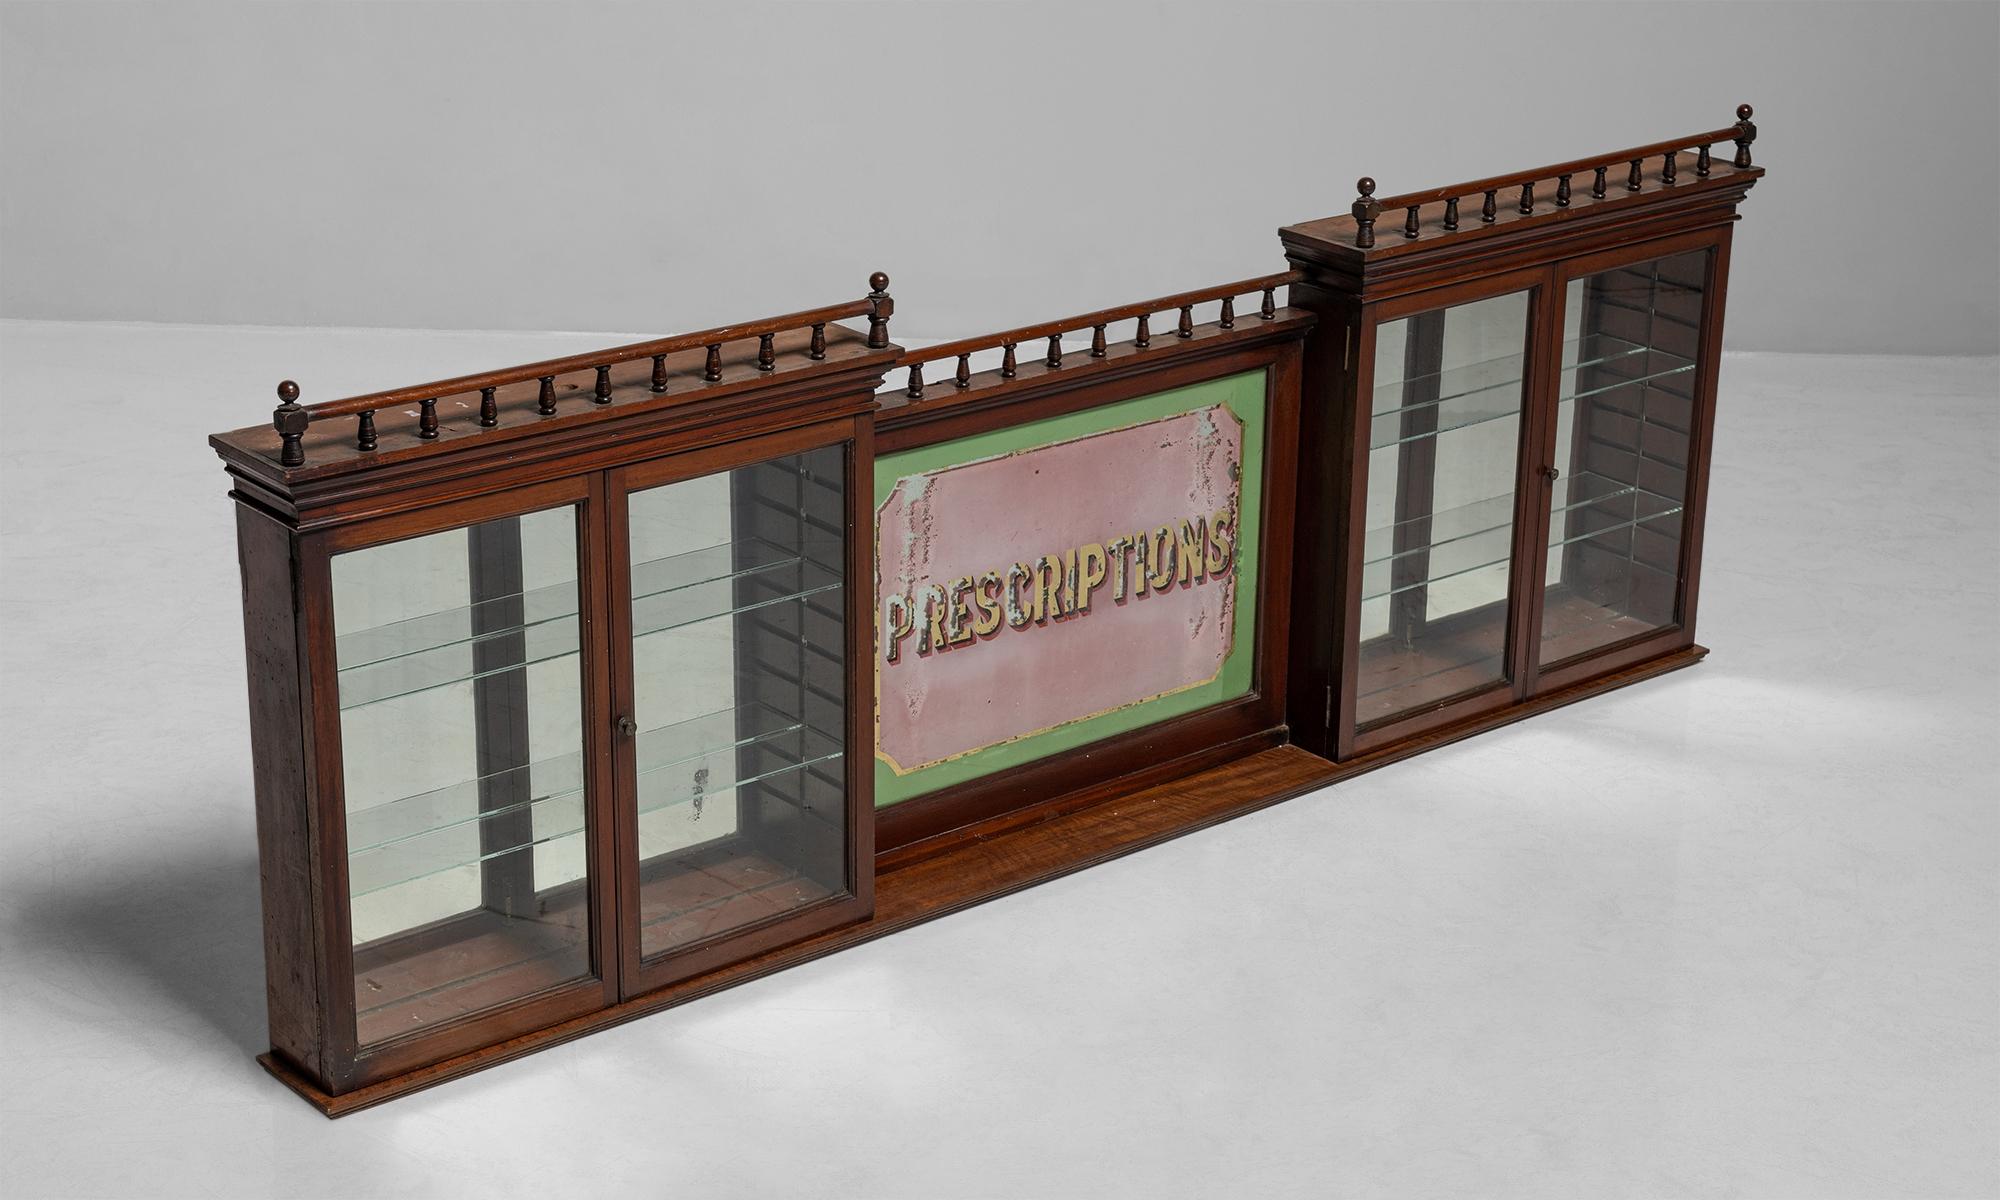 Rare “Prescriptions” cabinet

England circa 1900

Chemists cabinet originally made in England and later found in Holland. Constructed in Mahogany with original painted mirror.

Measures: 80.5”w x 6”d x 25.75”h.